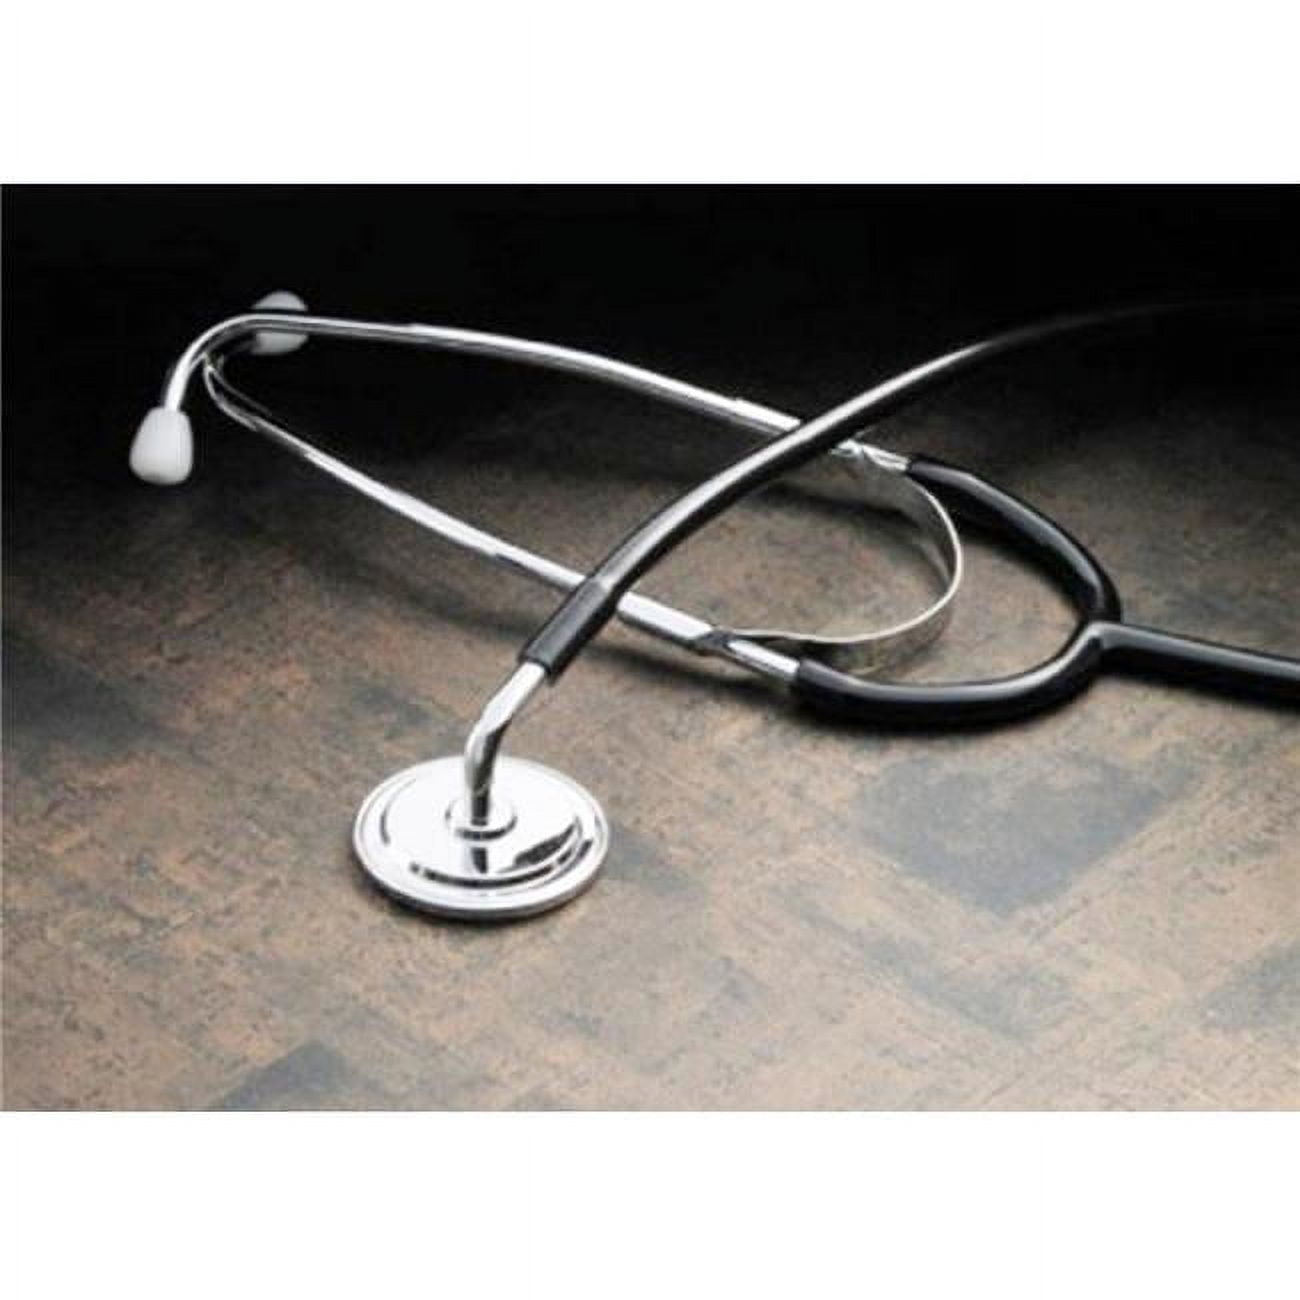 Picture of Tech Med 1211 22 in. Bowless Stethoscope, Black